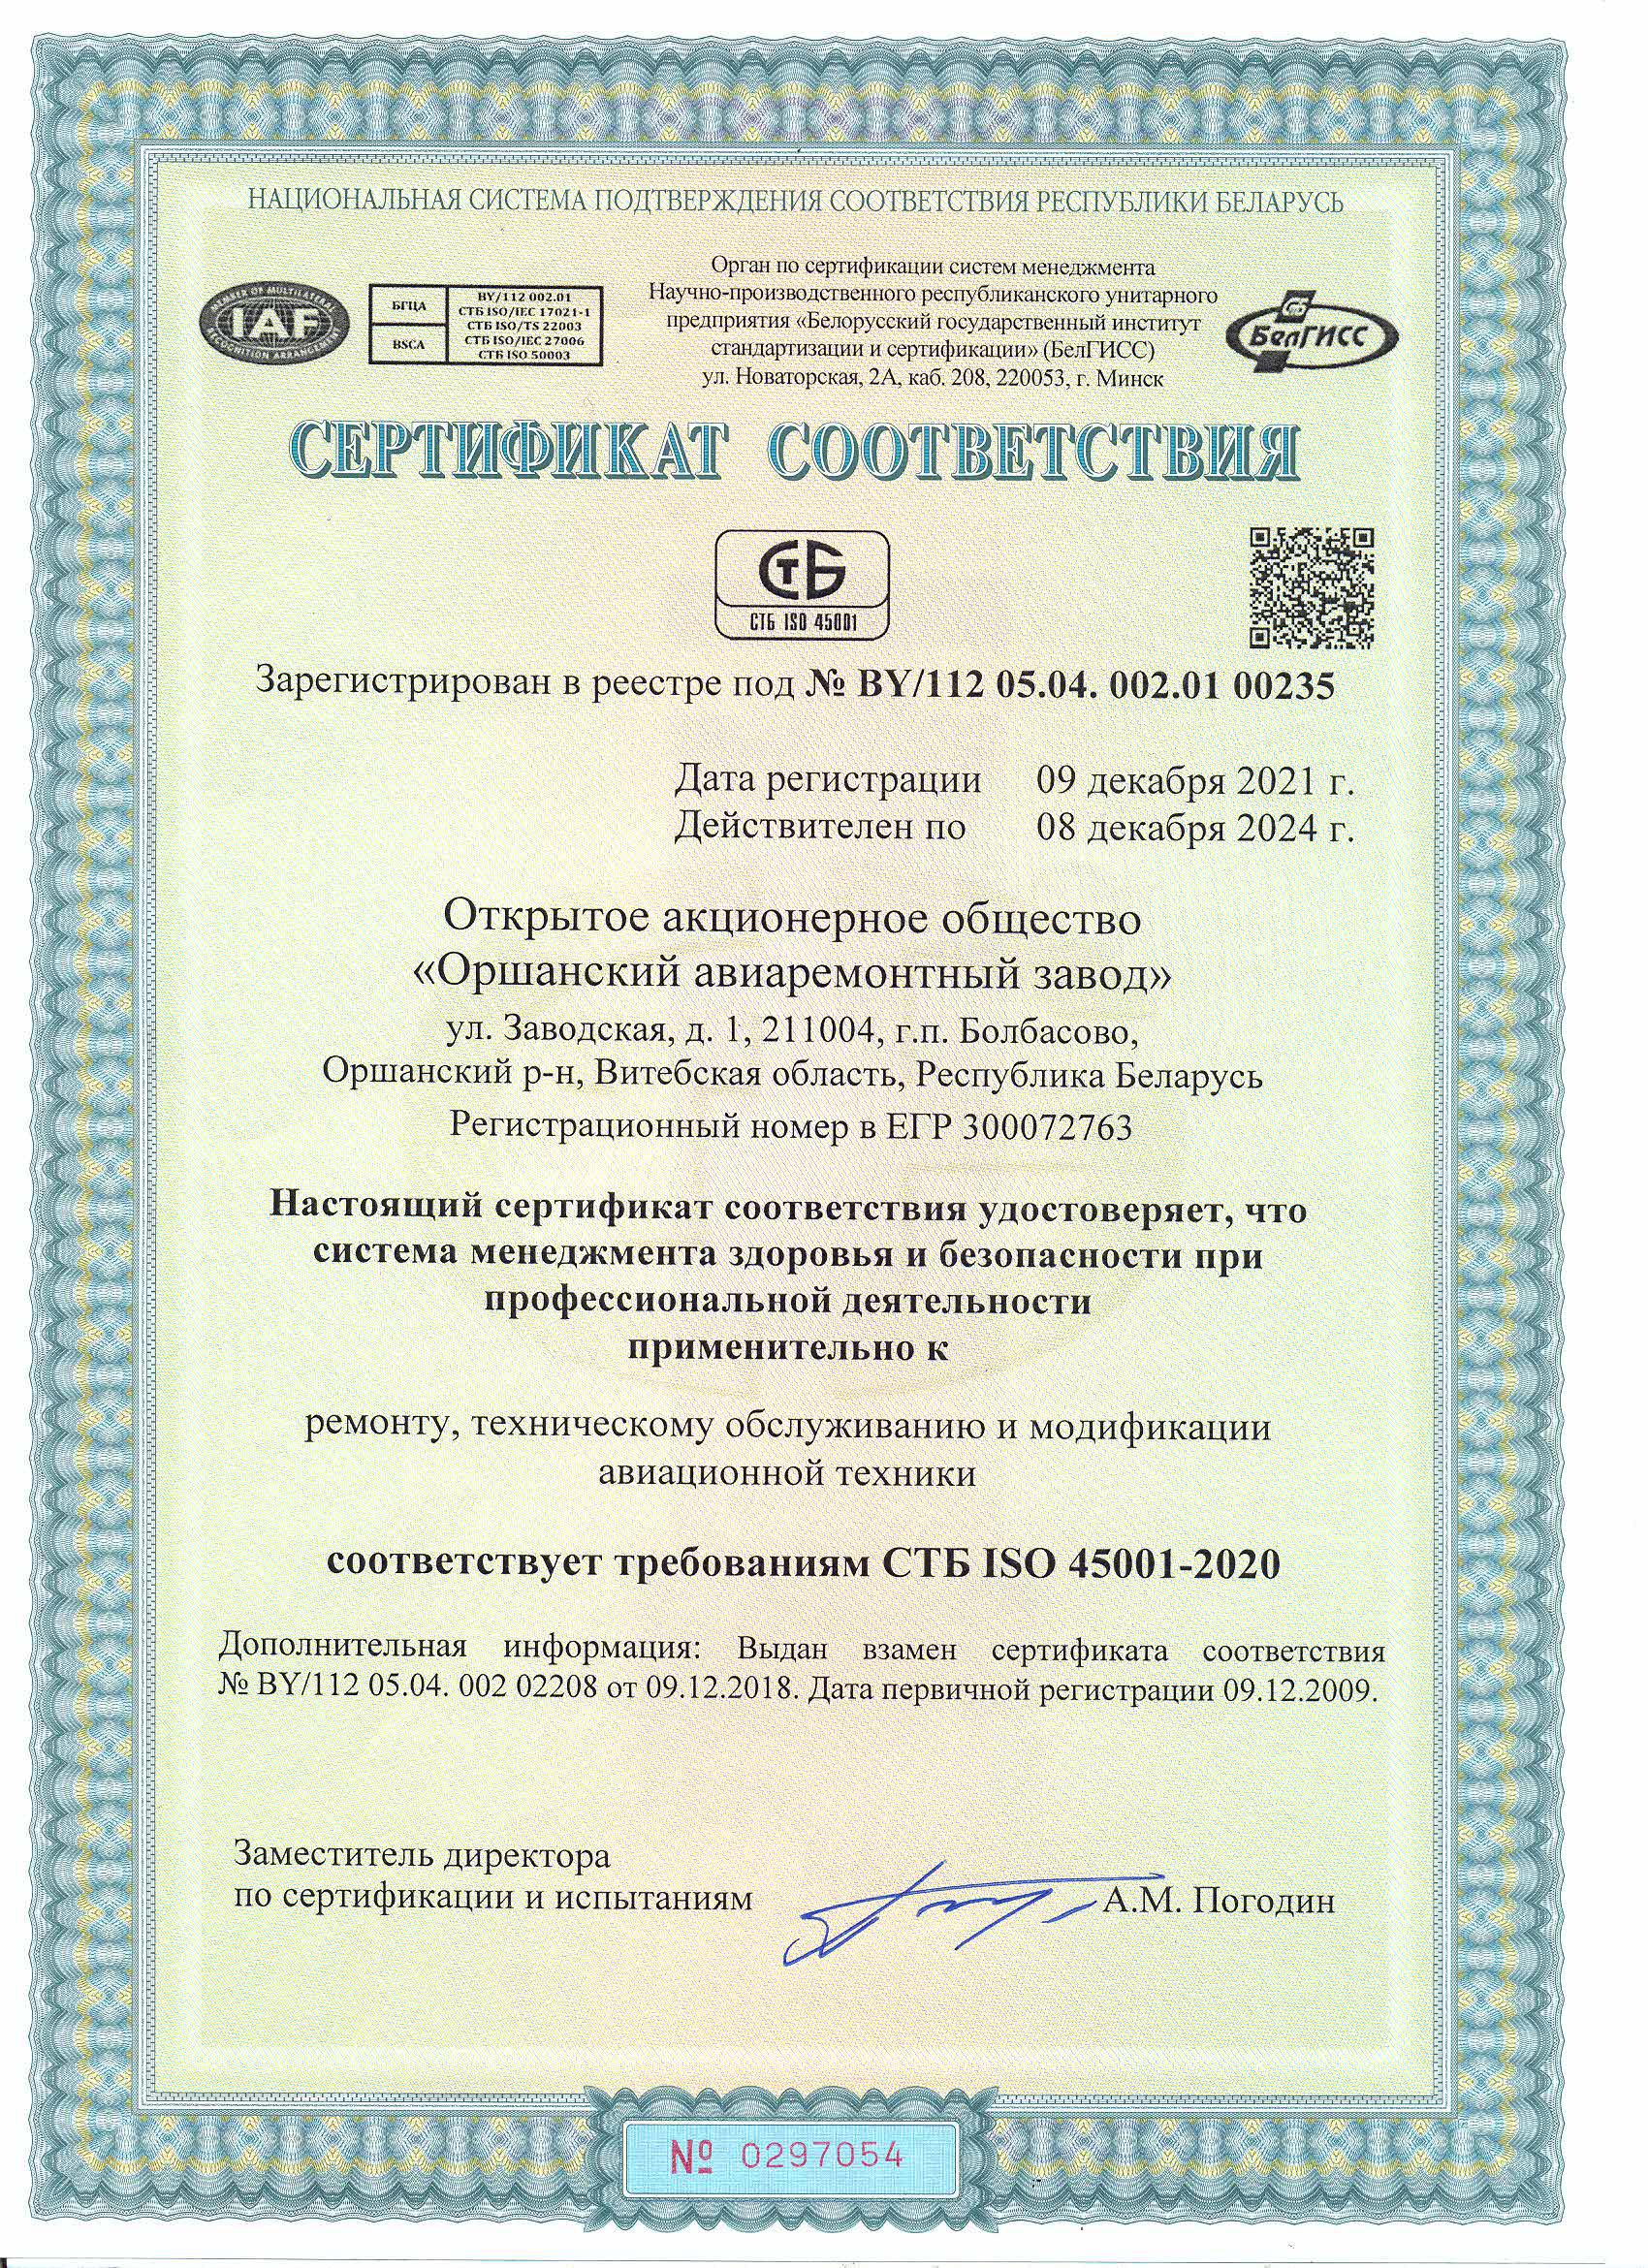 Certificate STB